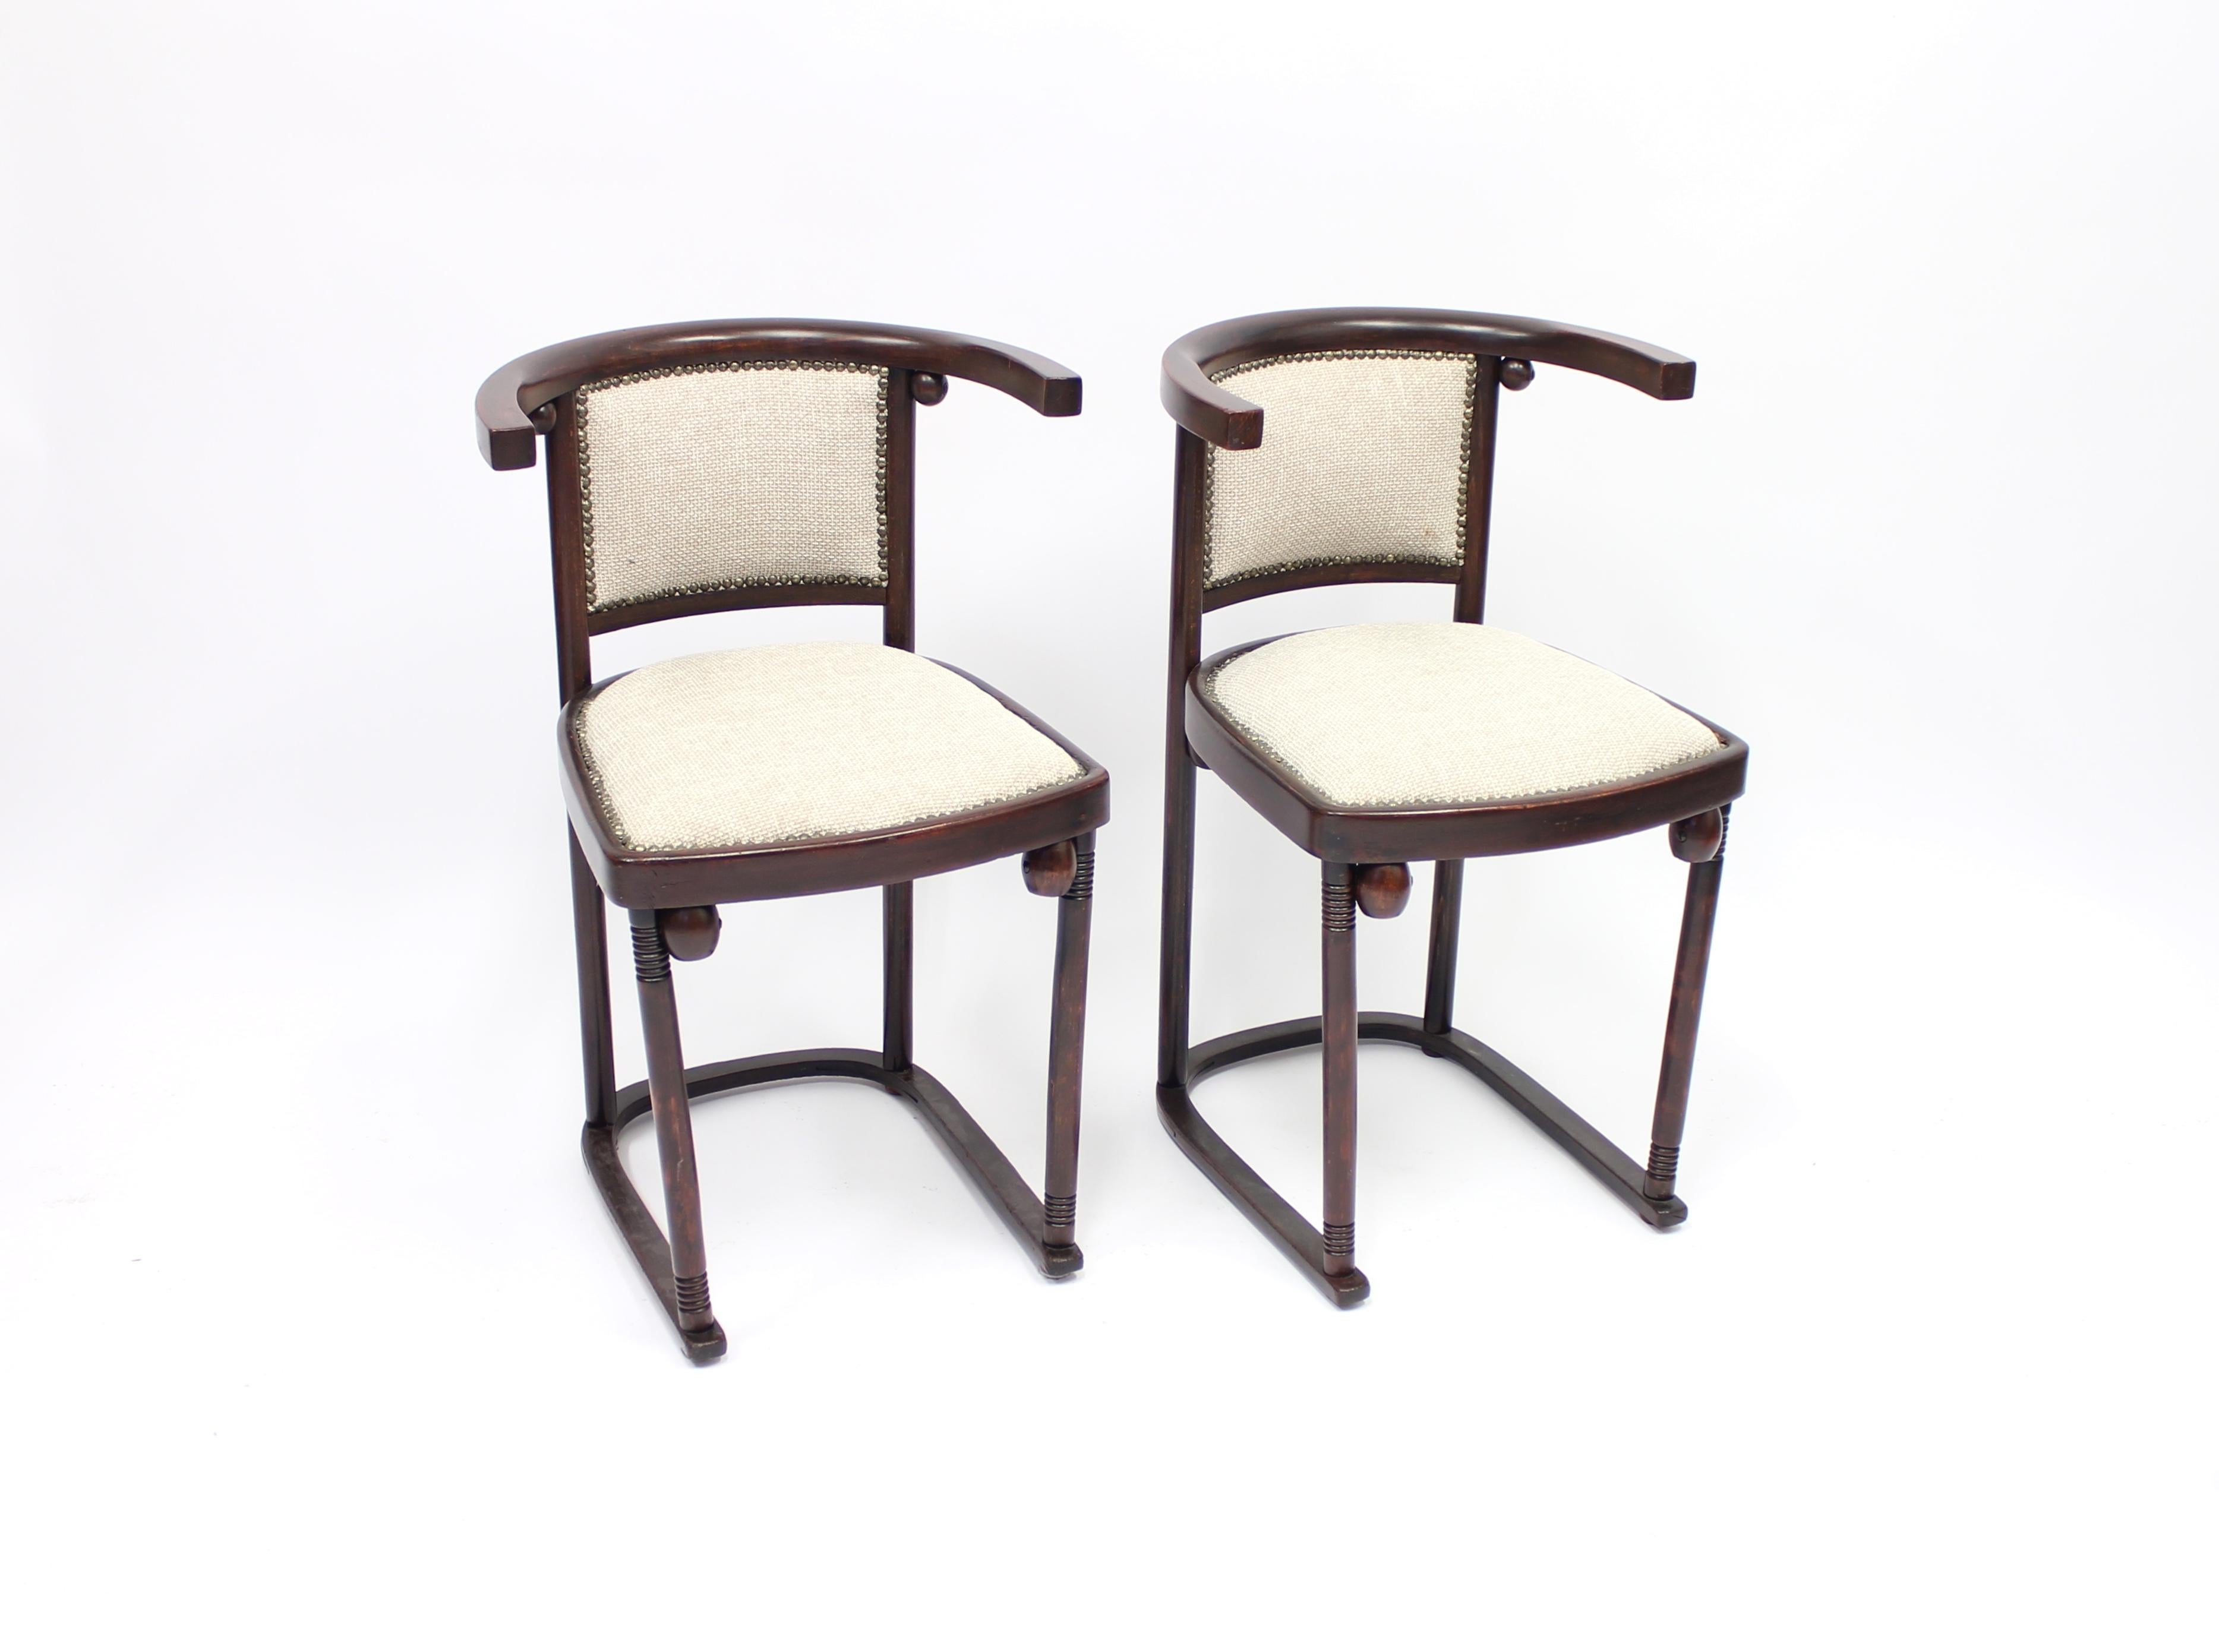 These two chairs were designed by Josef Hoffmann in 1907 for the famous Cabaret Fledermaus in Vienna and these examples were produced by Thonet in 1920-1930s. They are made from bentwood with a new fabric upholstered seat.